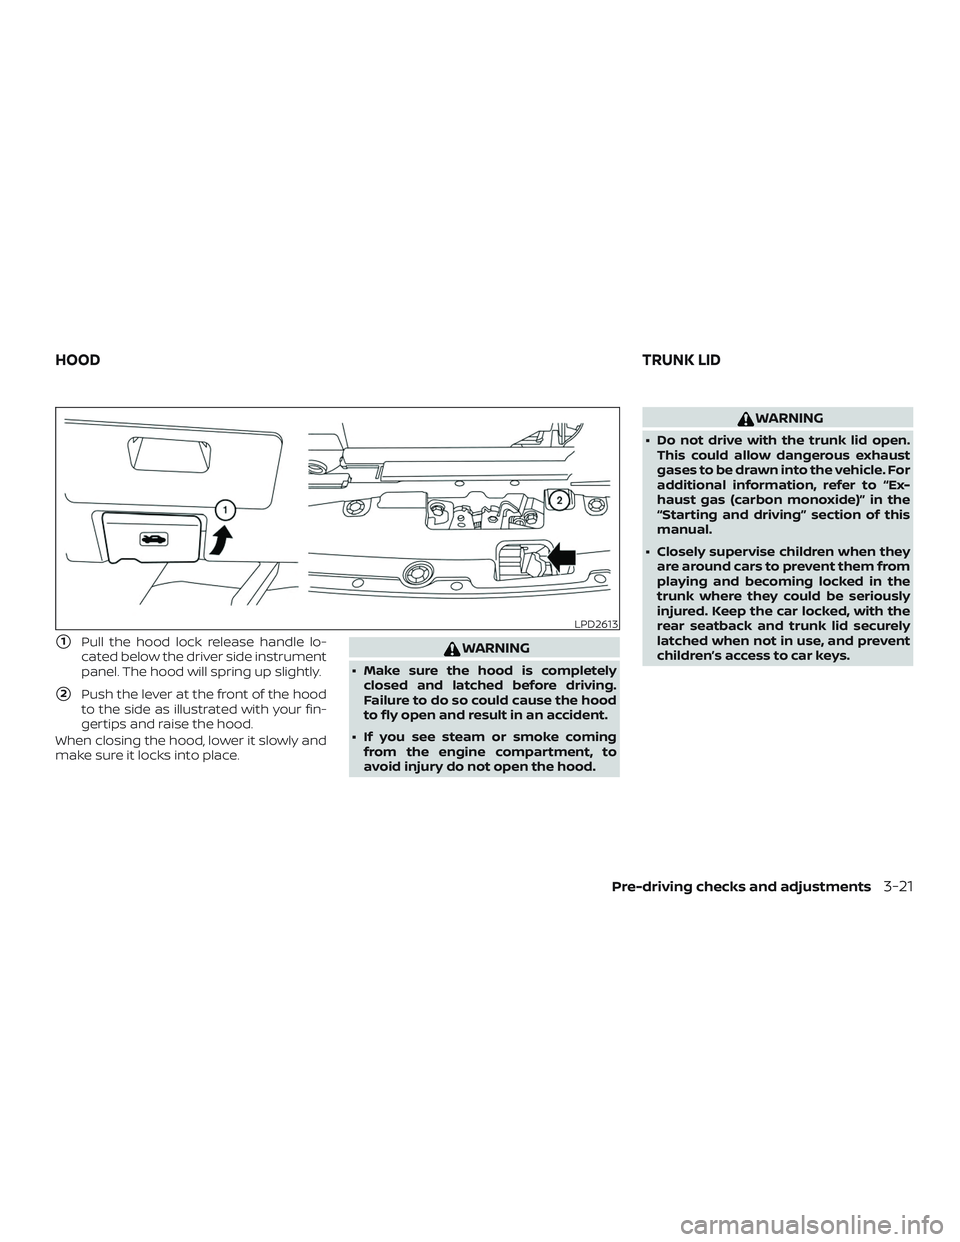 NISSAN MAXIMA 2020  Owner´s Manual 1Pull the hood lock release handle lo-
cated below the driver side instrument
panel. The hood will spring up slightly.
2Push the lever at the front of the hood
to the side as illustrated with your f